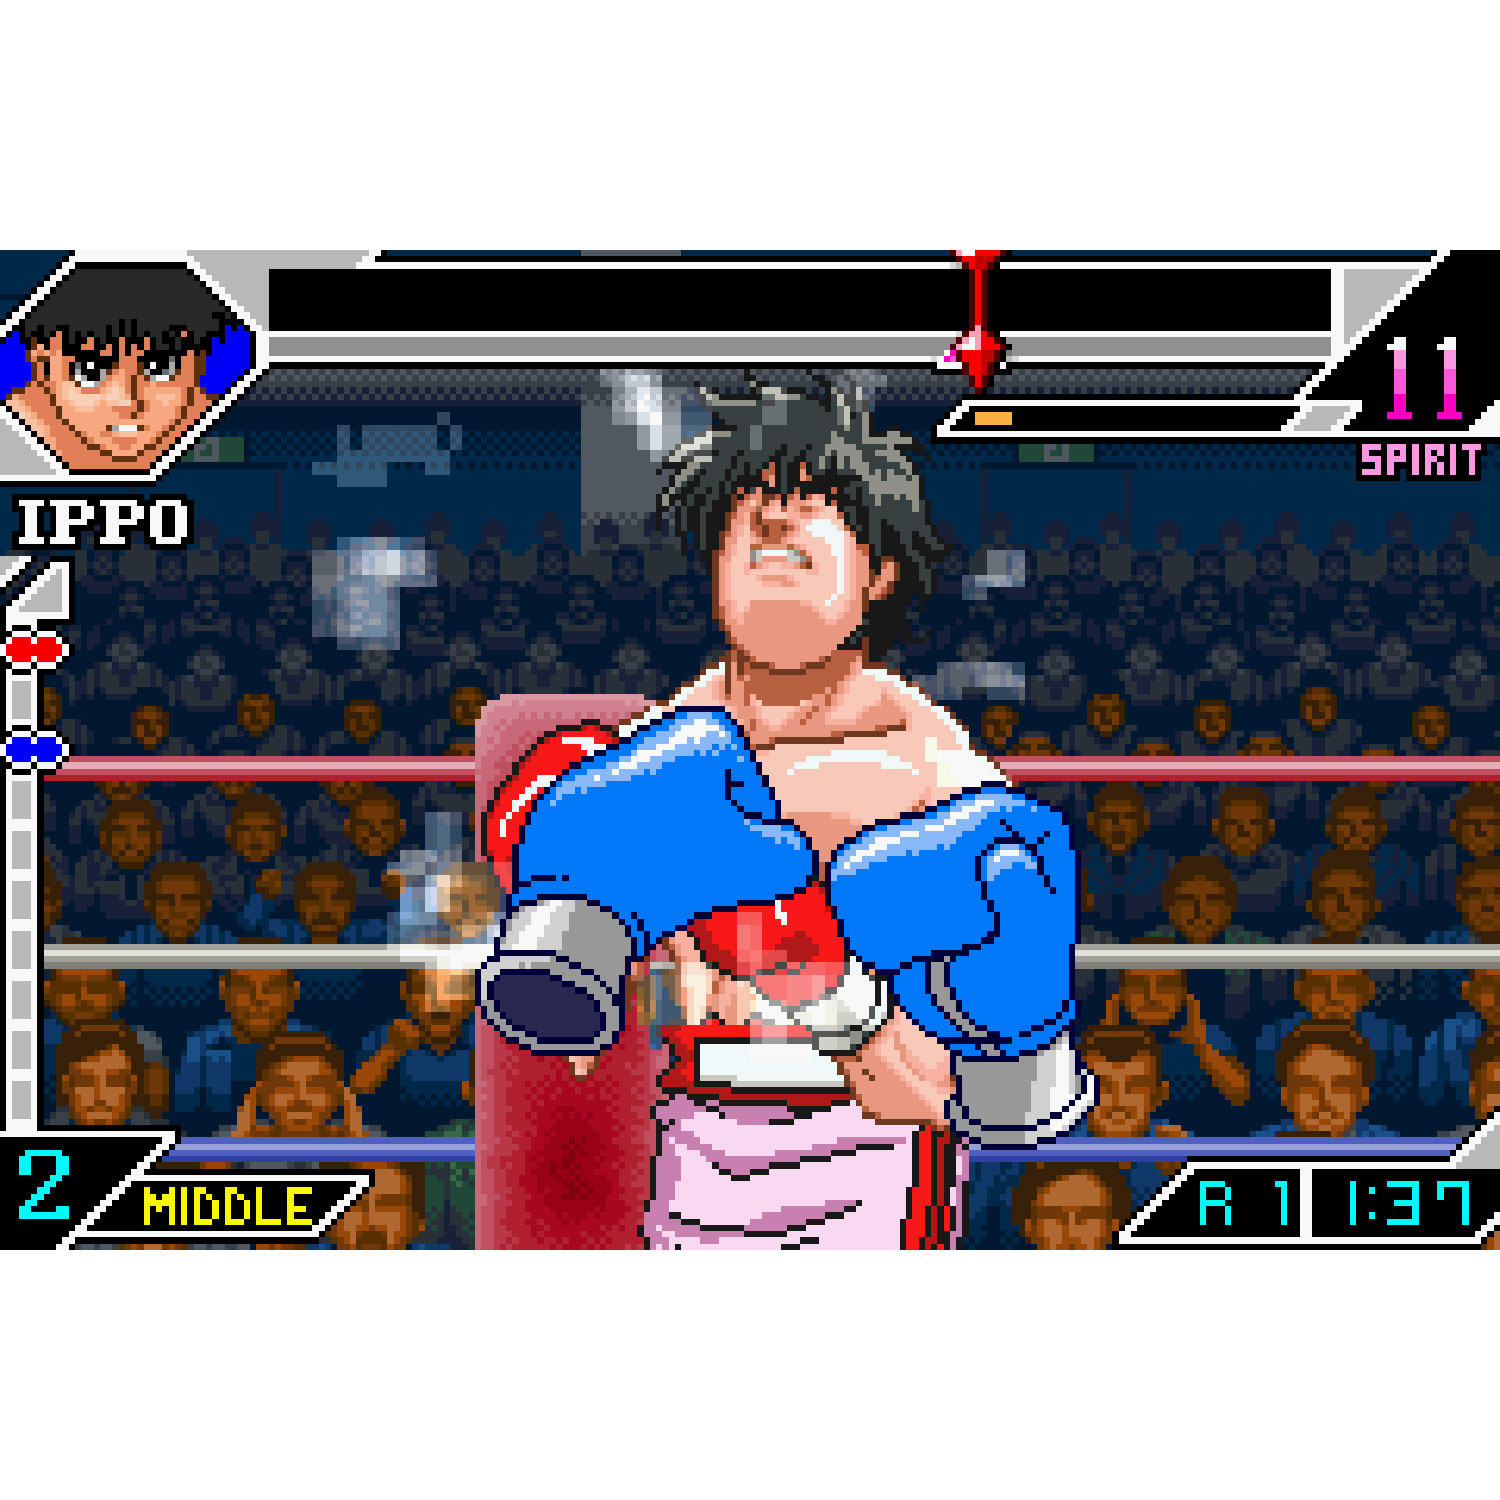 Play Game Boy Advance Hajime no Ippo - The Fighting (J)(Eurasia) Online in  your browser 